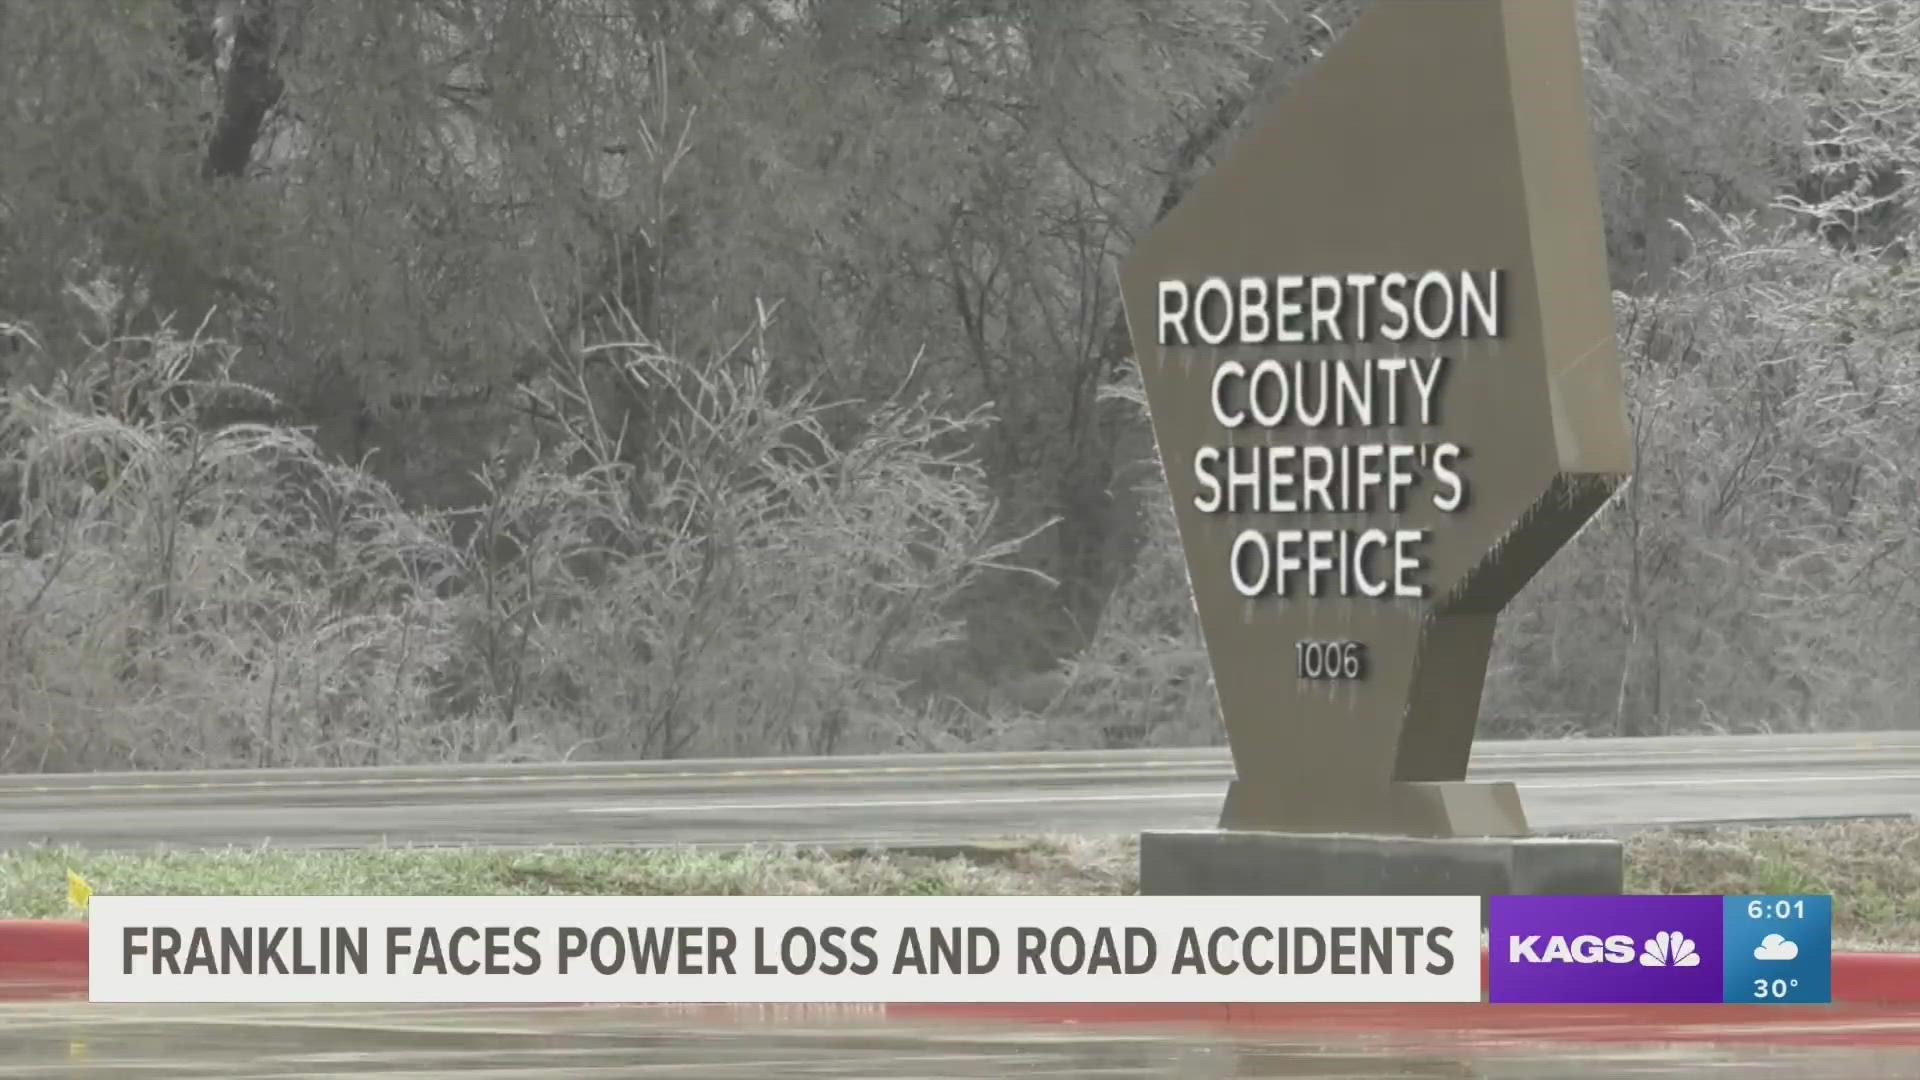 Robertson County Sheriff Gerald Yezak said that people in Franklin have been without power for hours.